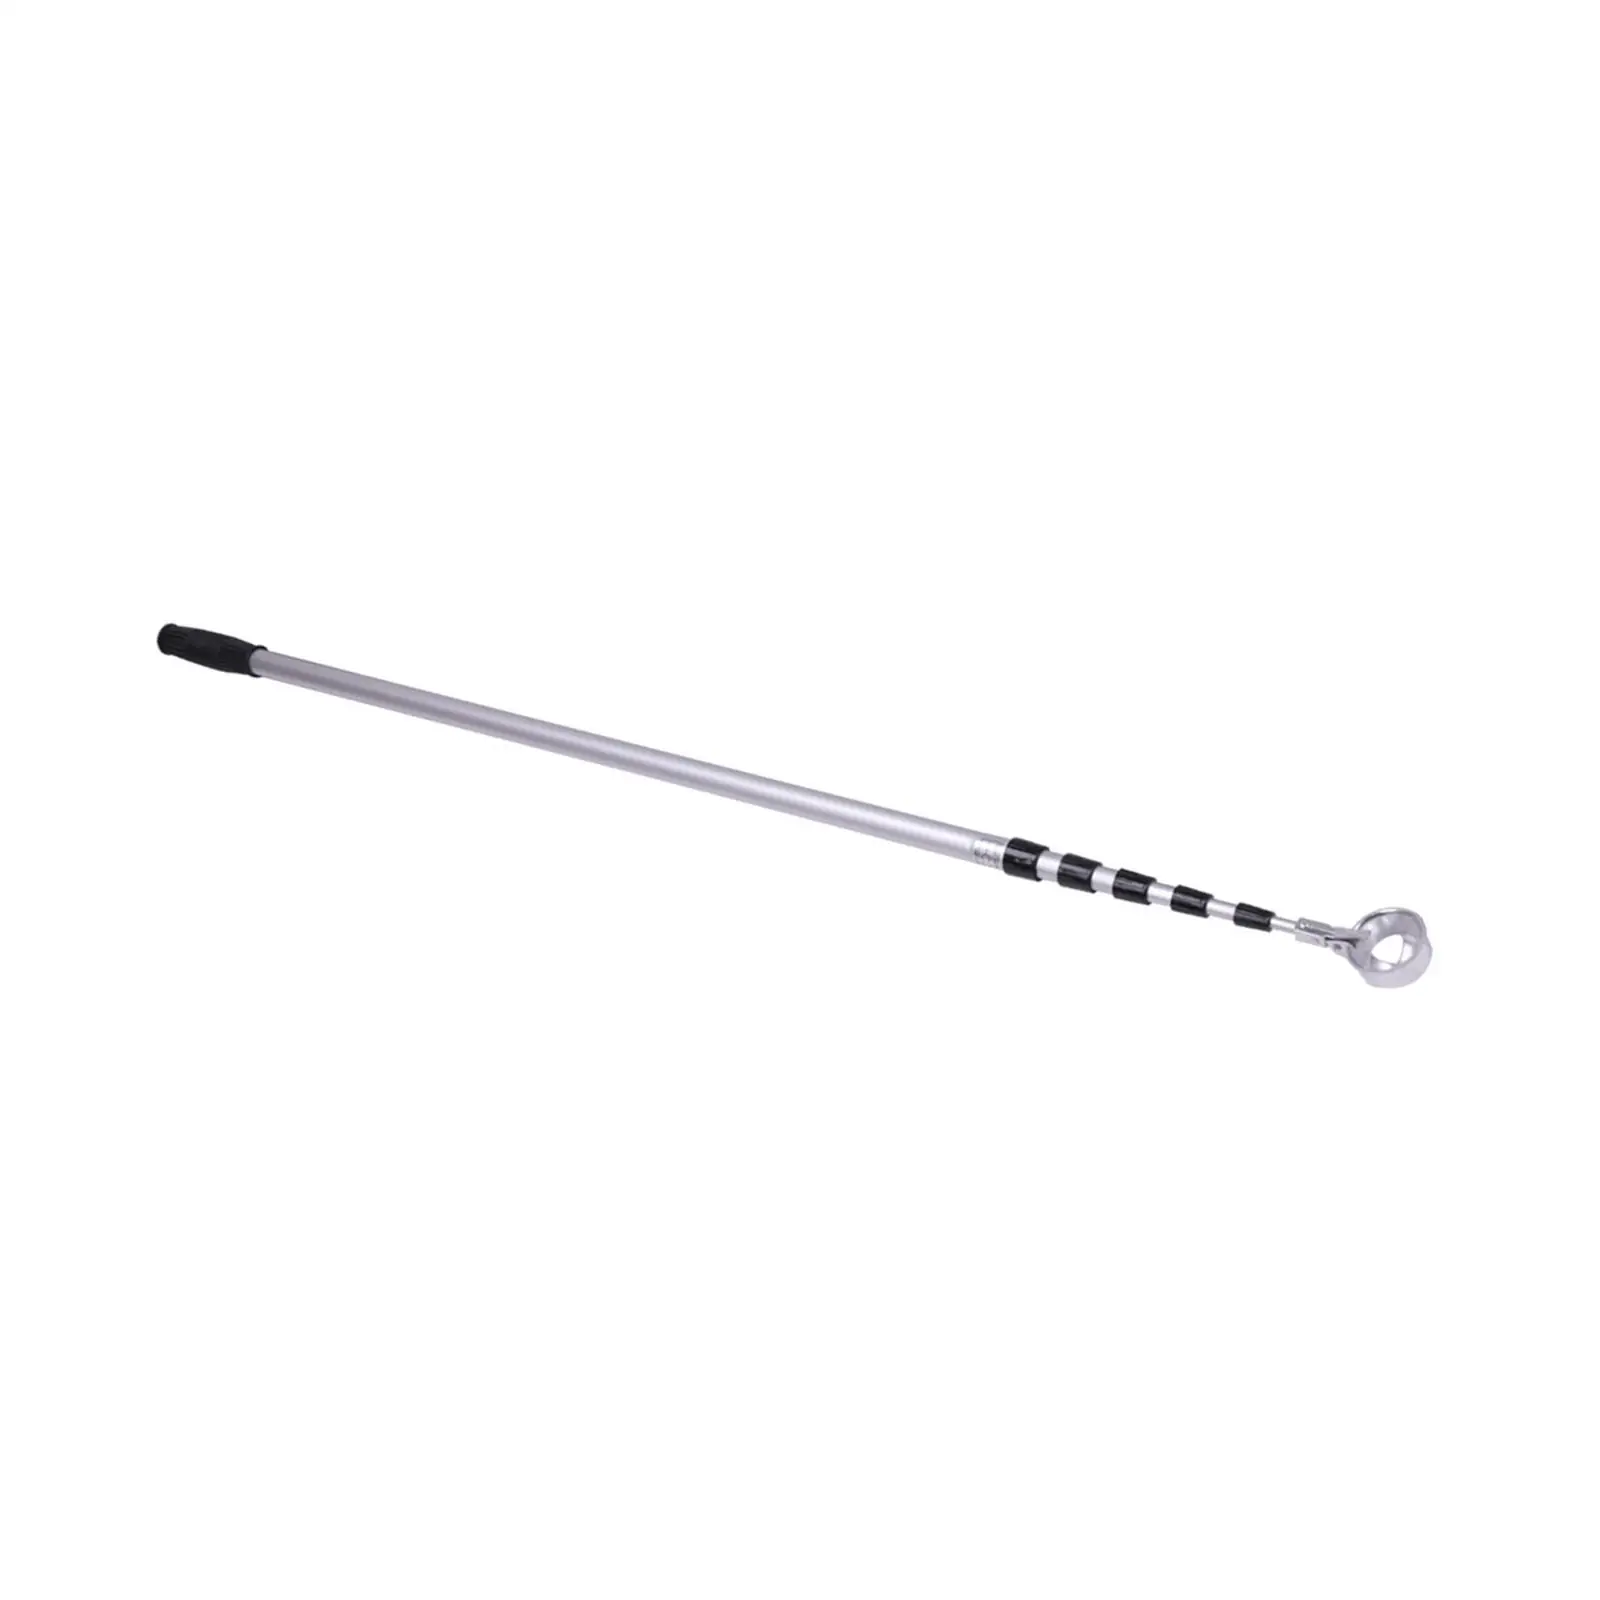 Golf Ball Retriever for Water Picker Tools with Automatic Locking Spoon Extendable 18 ft Telescopic Grabber Claw Tool